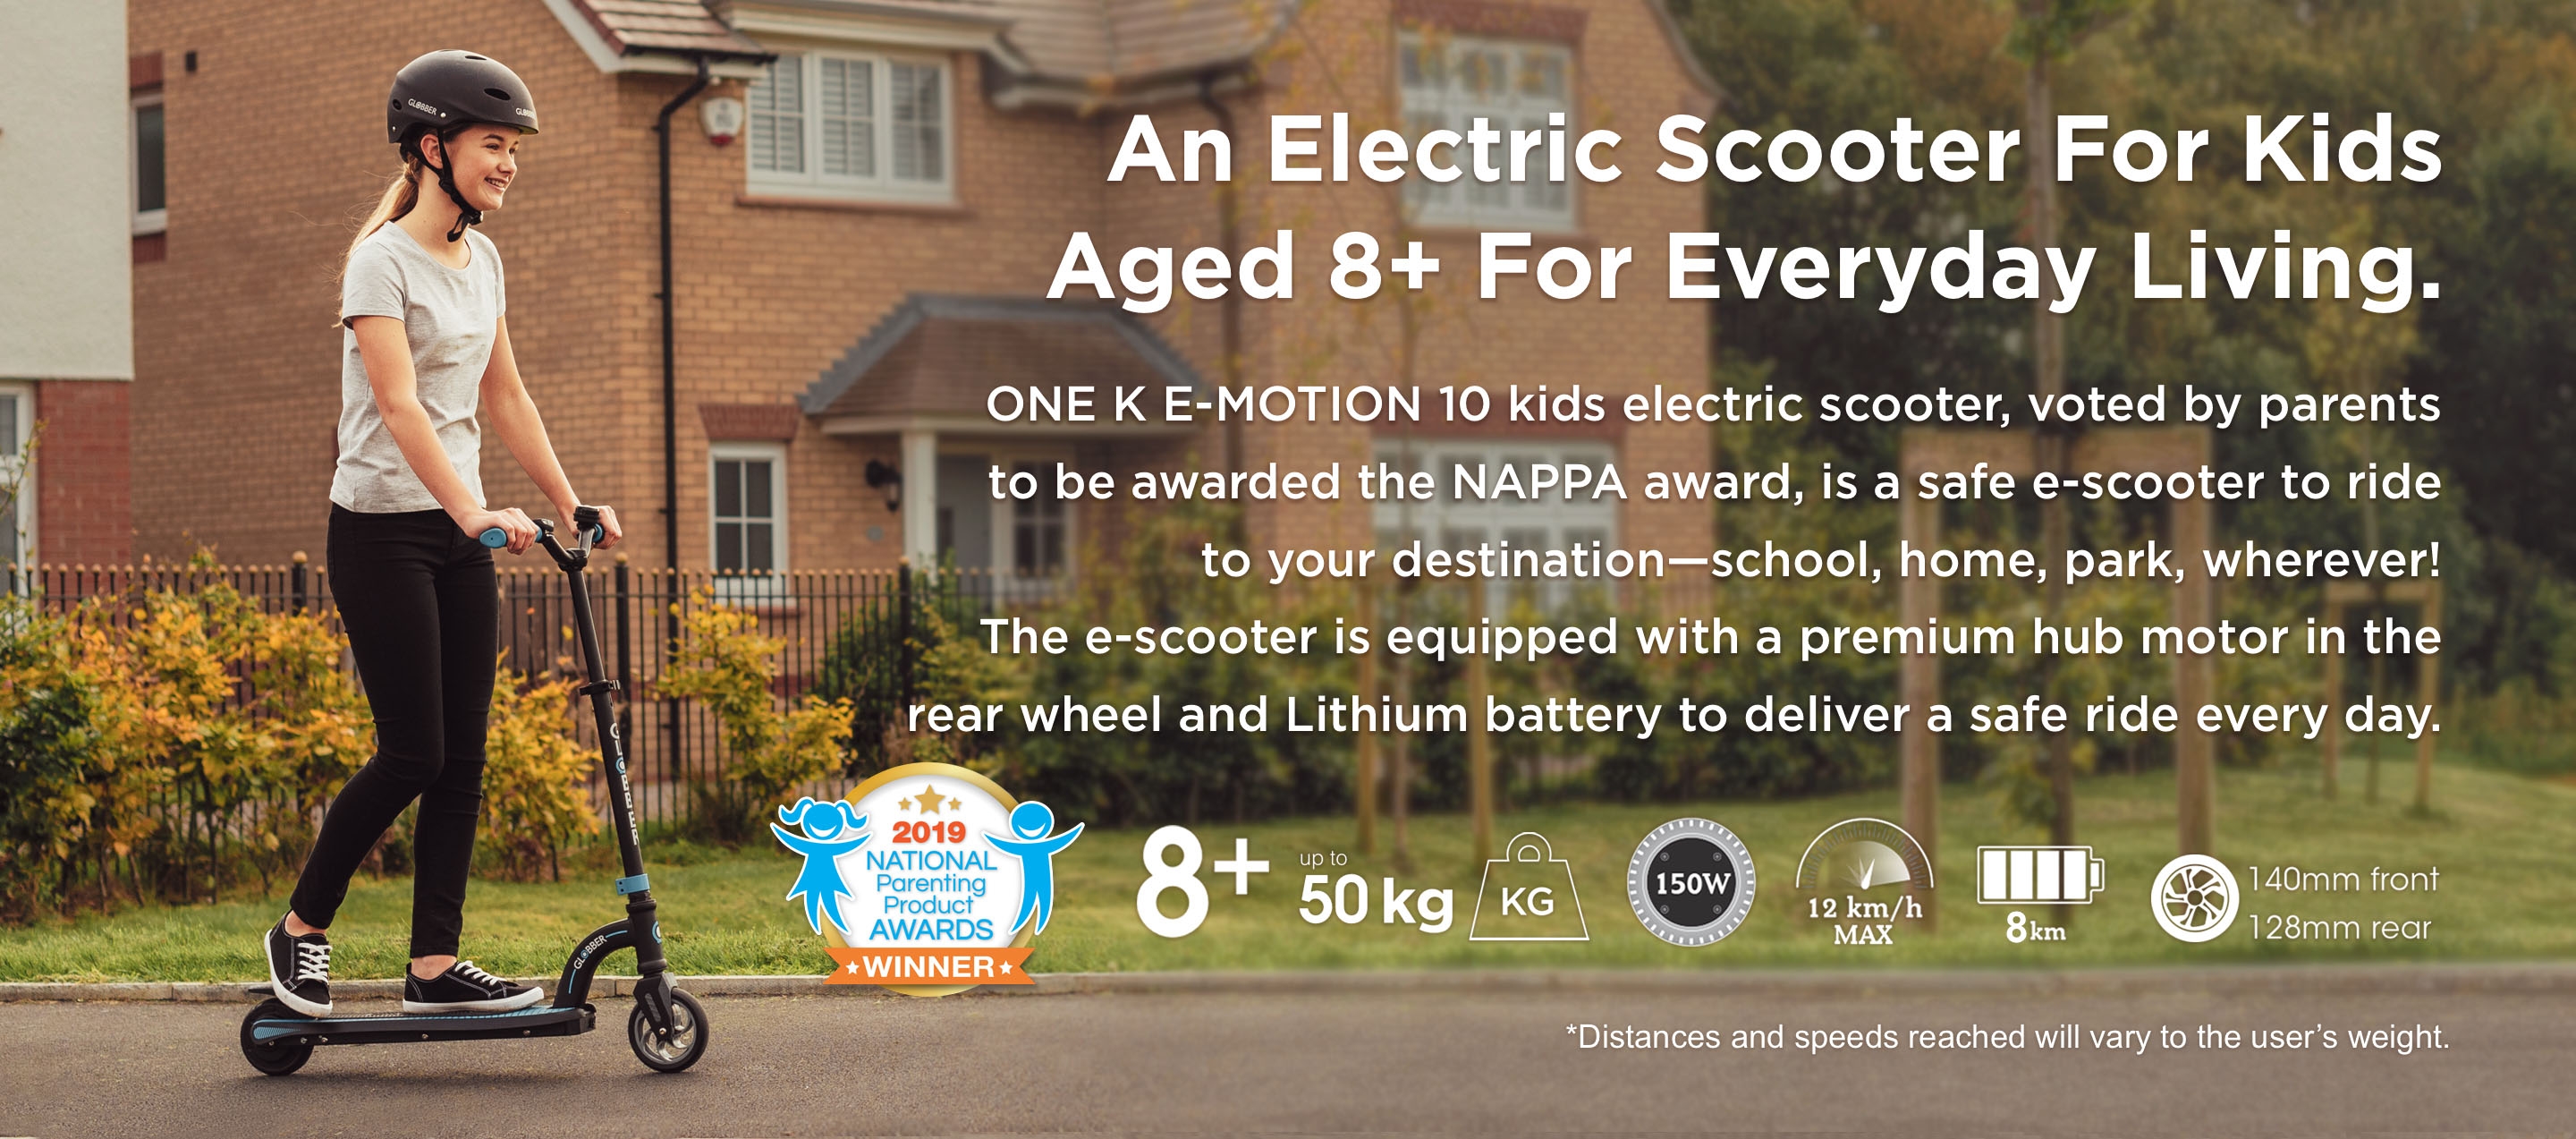 An Electric Scooter For Kids Aged 8+ For Everyday Living. ONE K E-MOTION 10 kids electric scooter, voted by parents to be awarded the NAPPA award, is a safe e-scooter to ride to your destination—school, home, park, wherever! The e-scooter is equipped with a premium hub motor in the rear wheel and a Lithium battery to deliver a safe ride every day.  *Distances and speeds reached will vary to the user’s weight. 